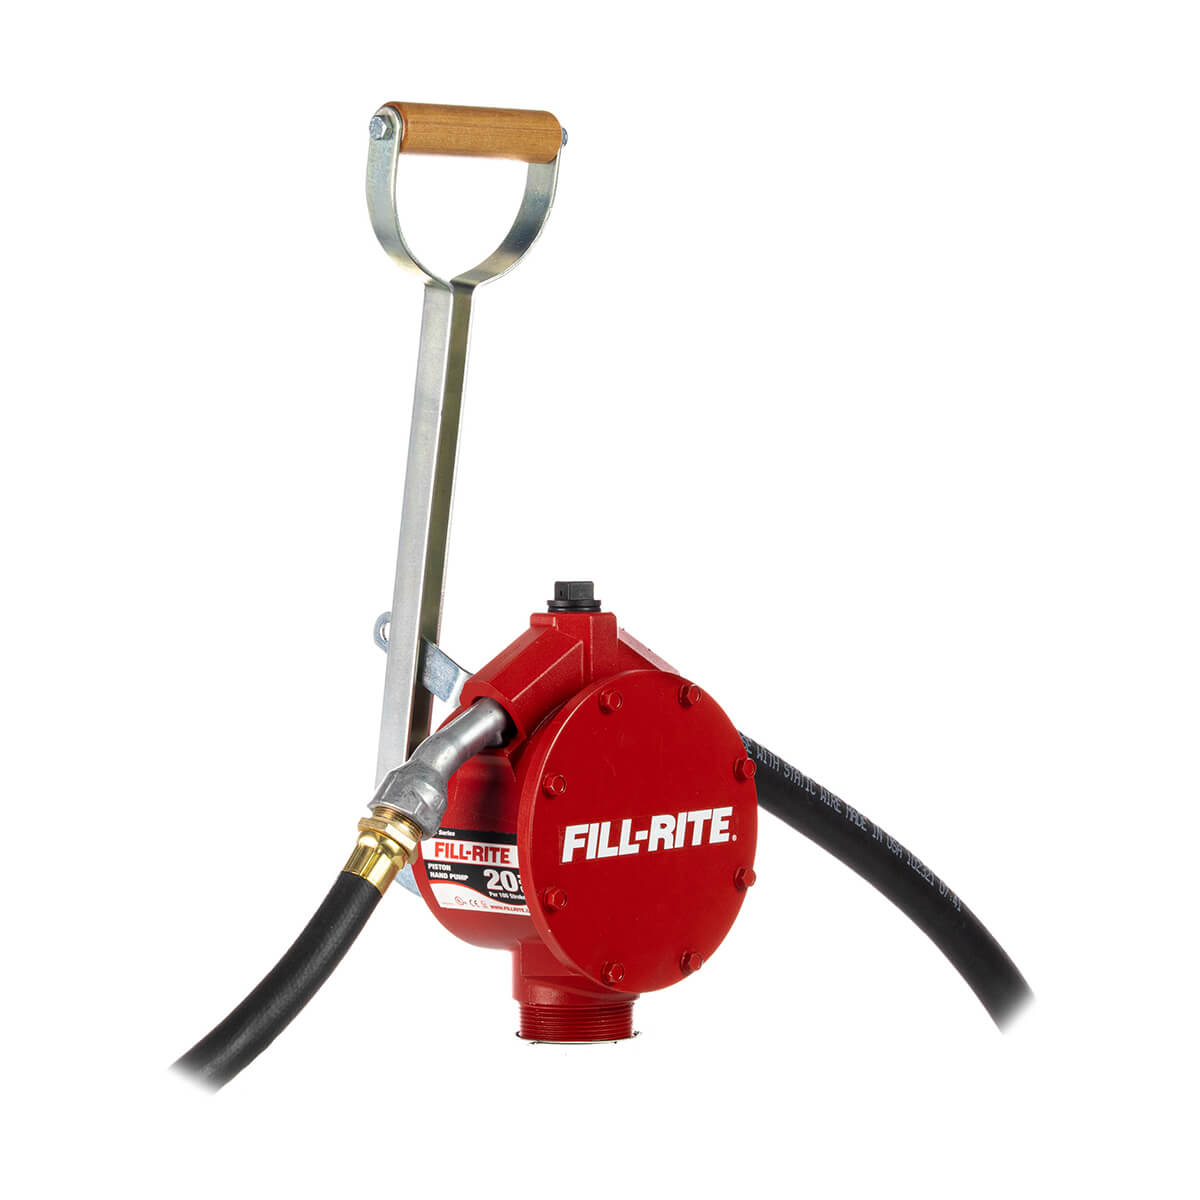 Piston Hand Pump Steel Telescoping Tube - Hose and Nozzle Spout - FR152